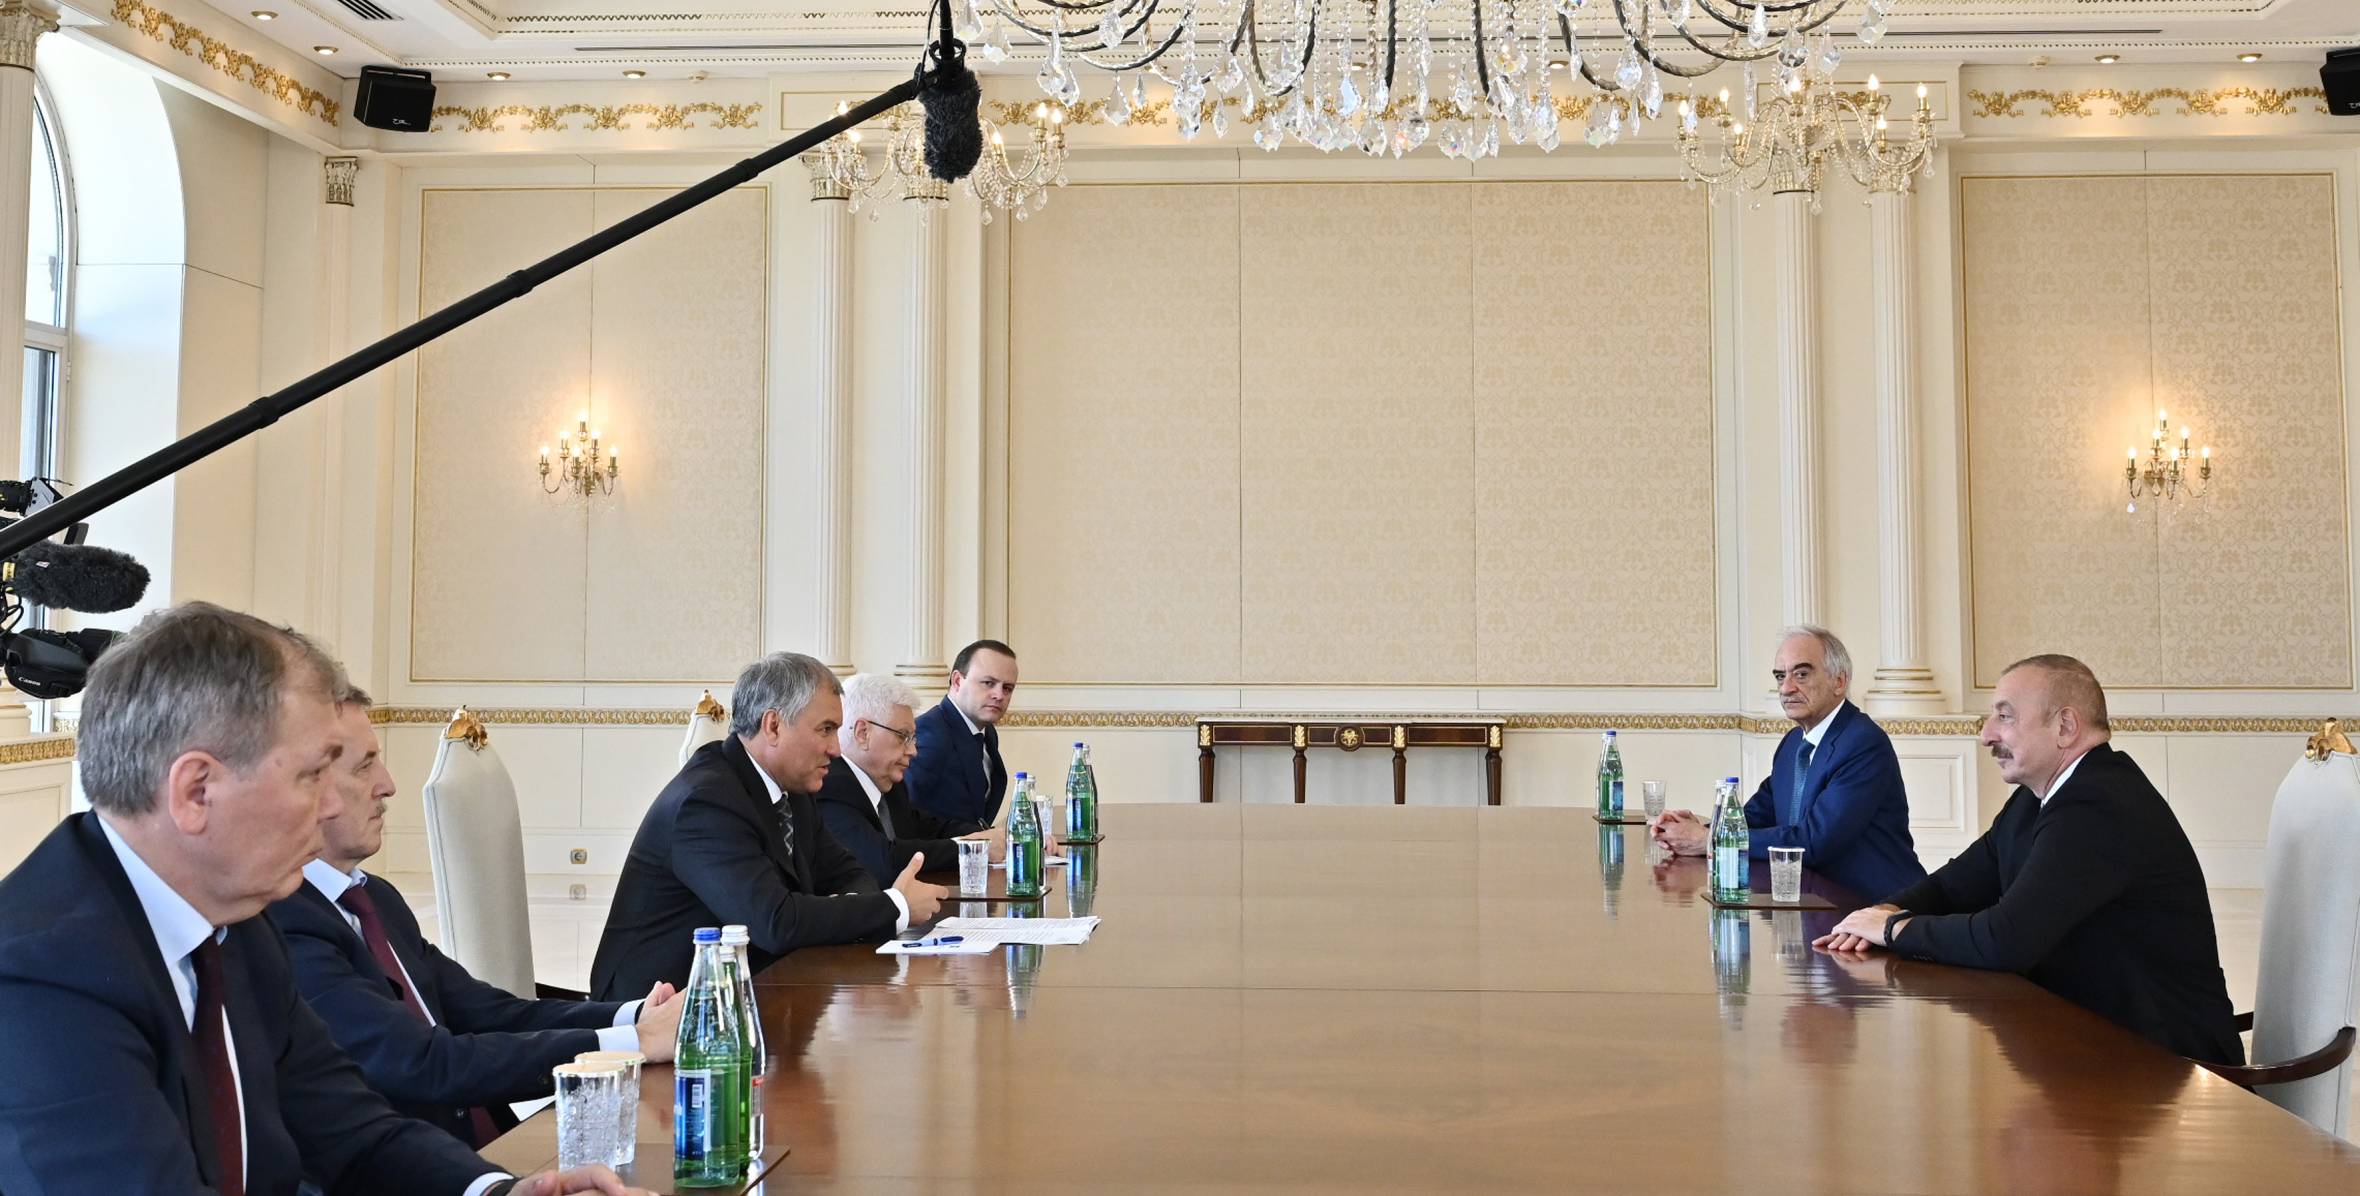 Ilham Aliyev received a delegation led by the Chairman of the State Duma of Russia